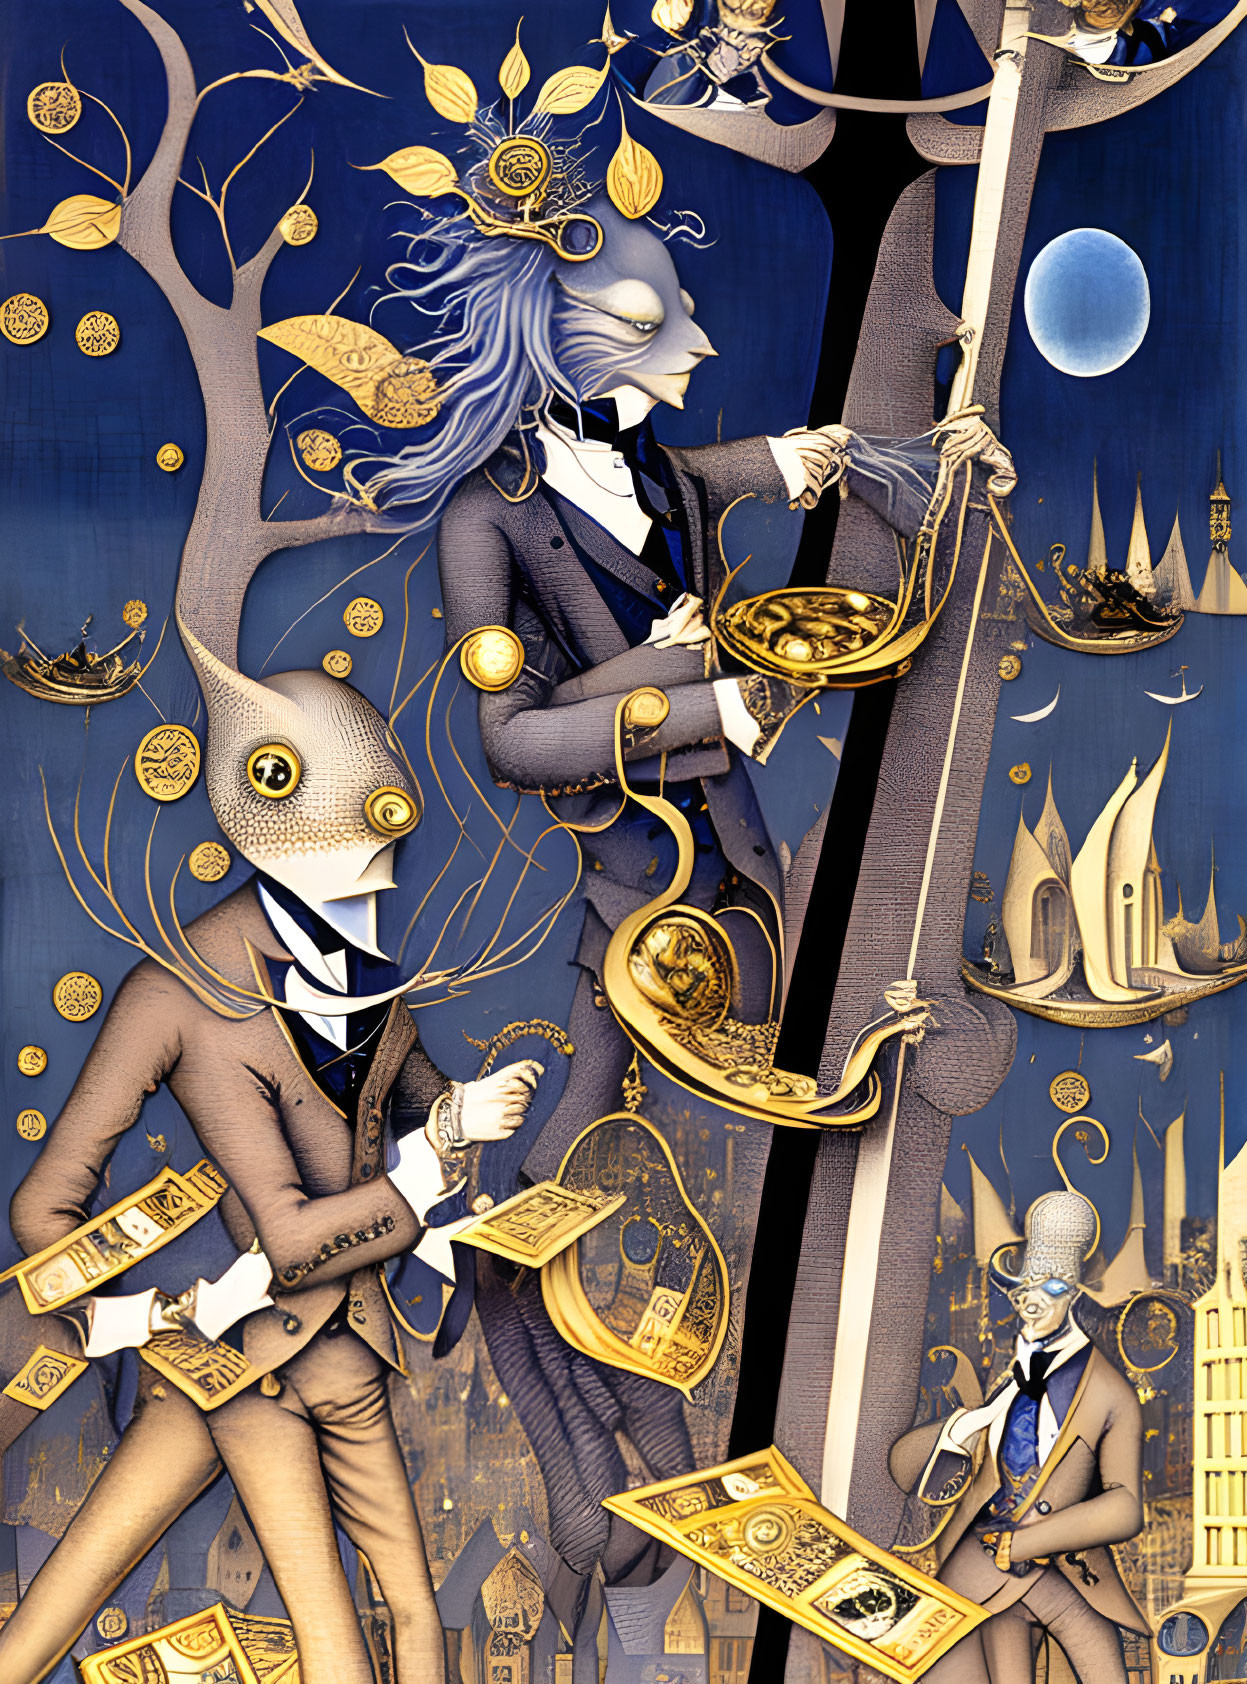 Surreal illustration: geometric animal-headed figures in suits amid trees, coins, and fantastical architecture